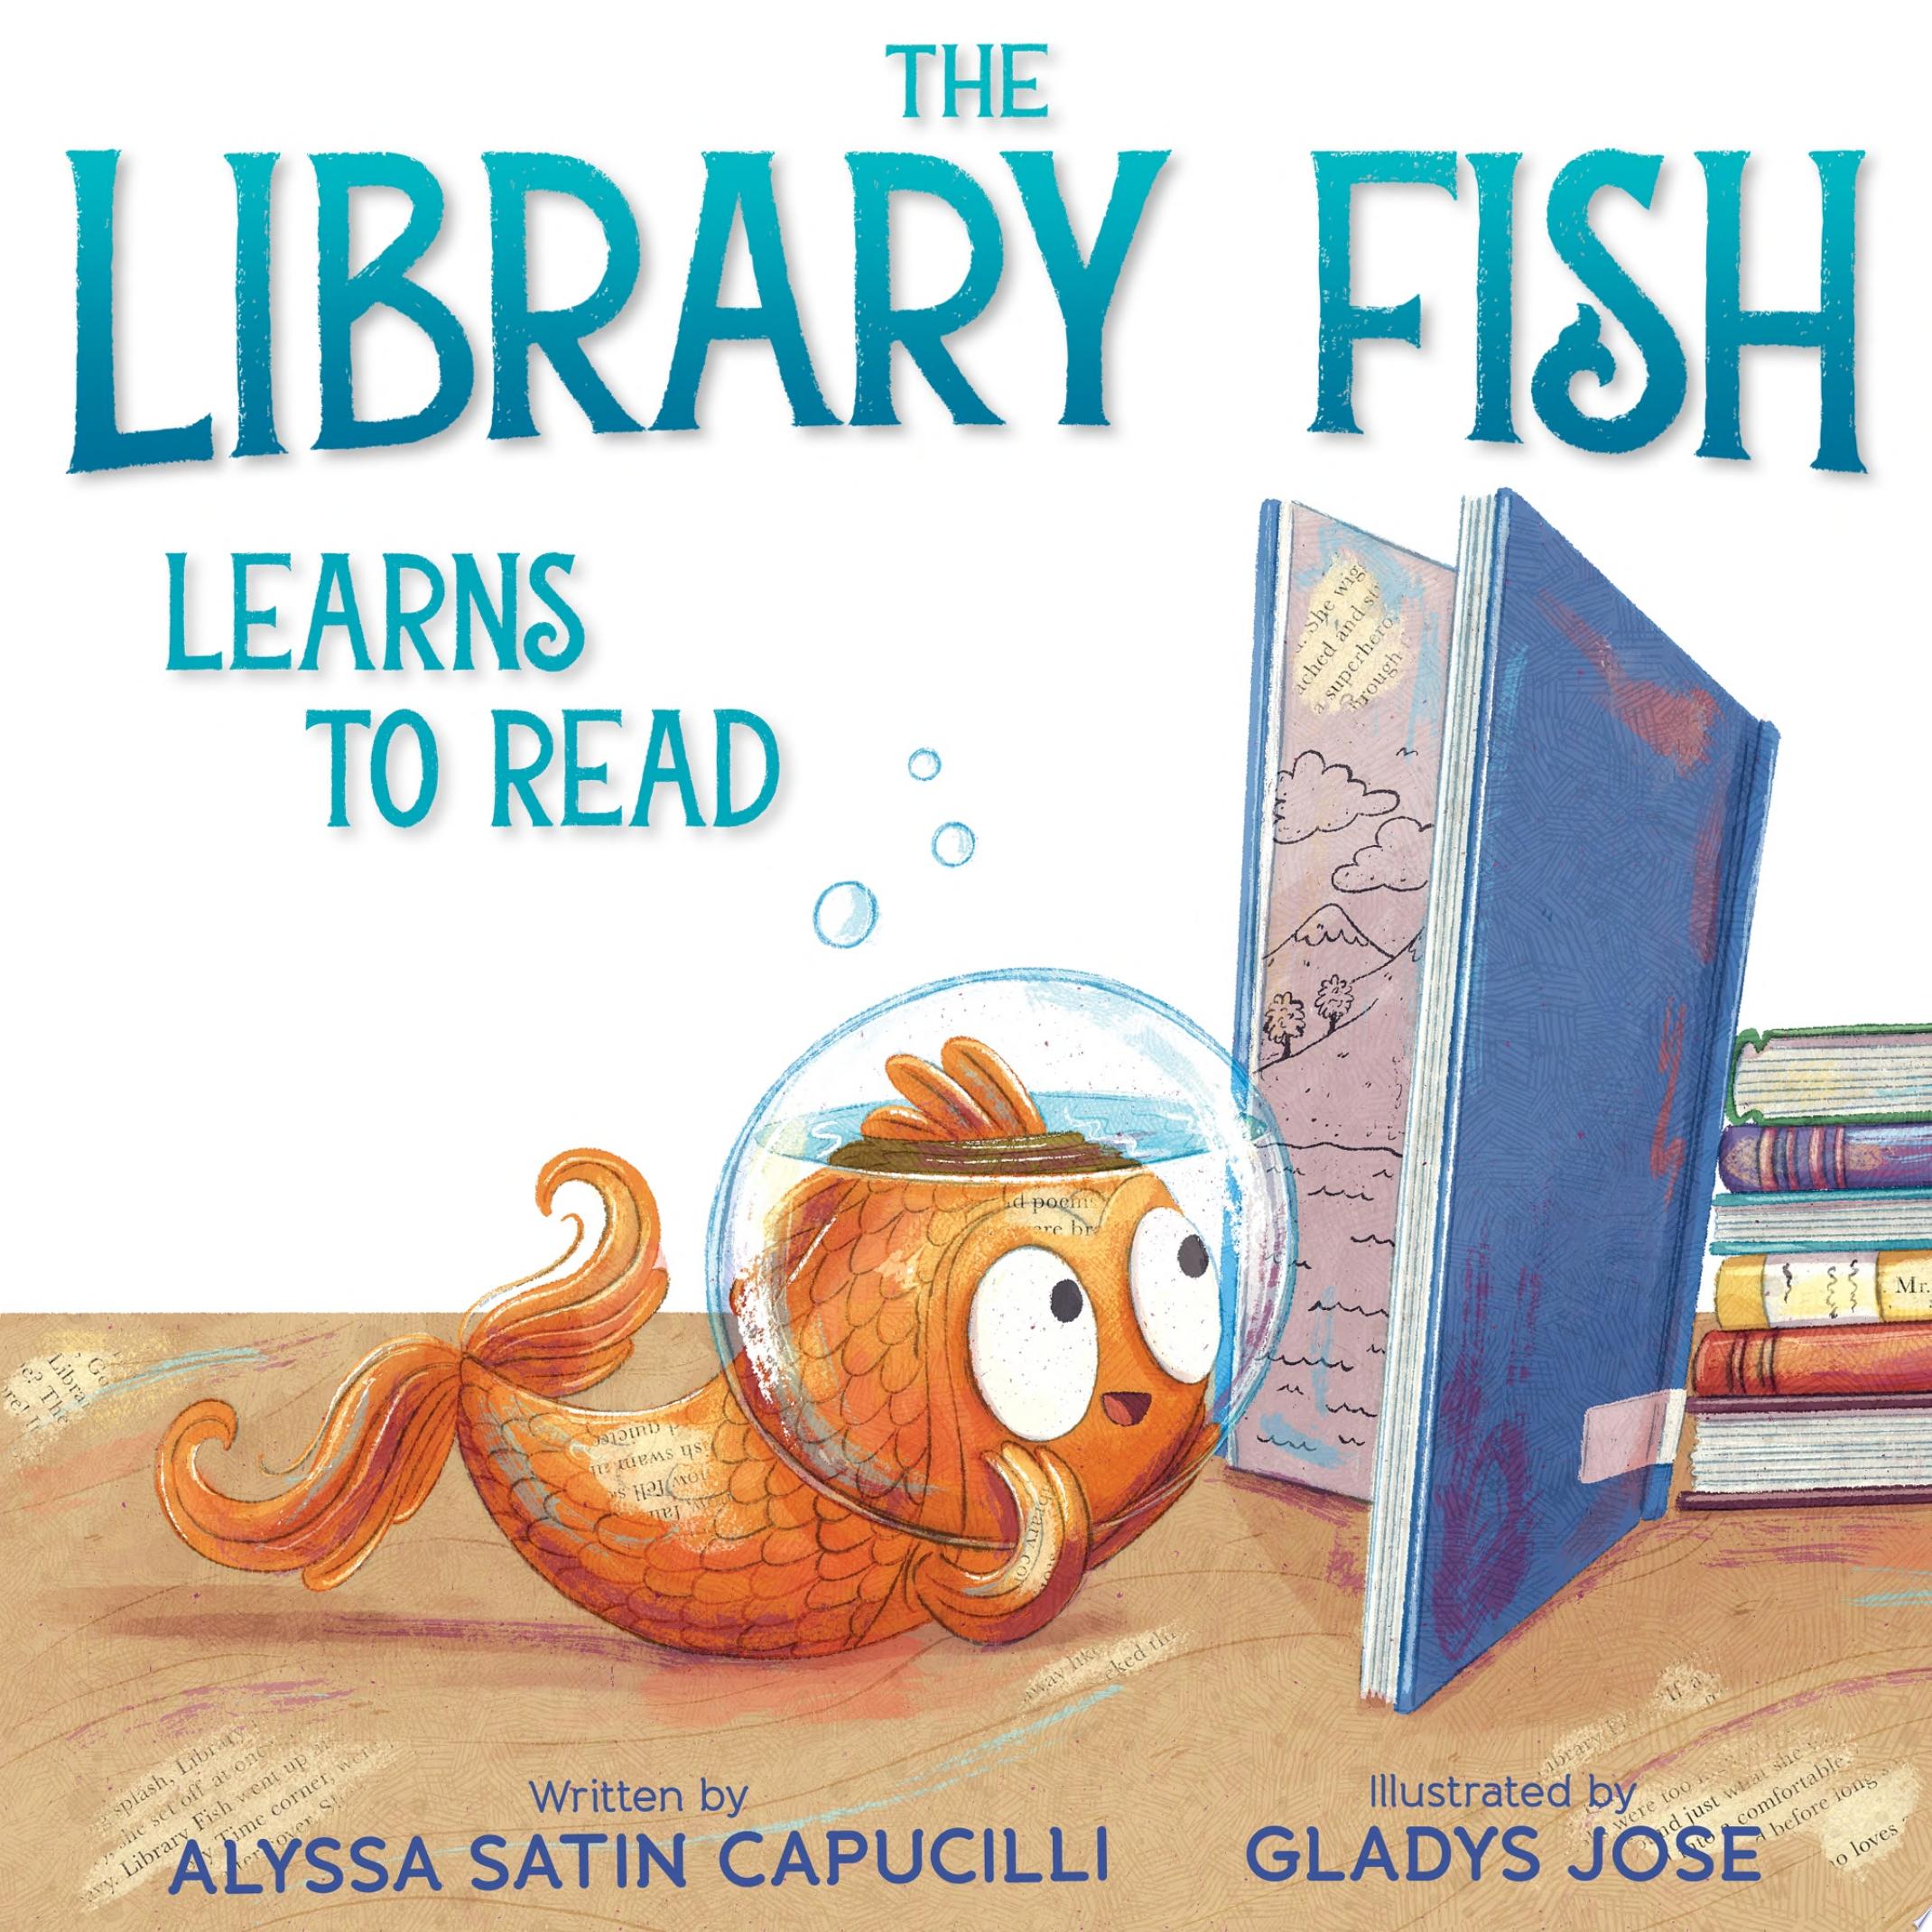 Image for "The Library Fish Learns to Read"